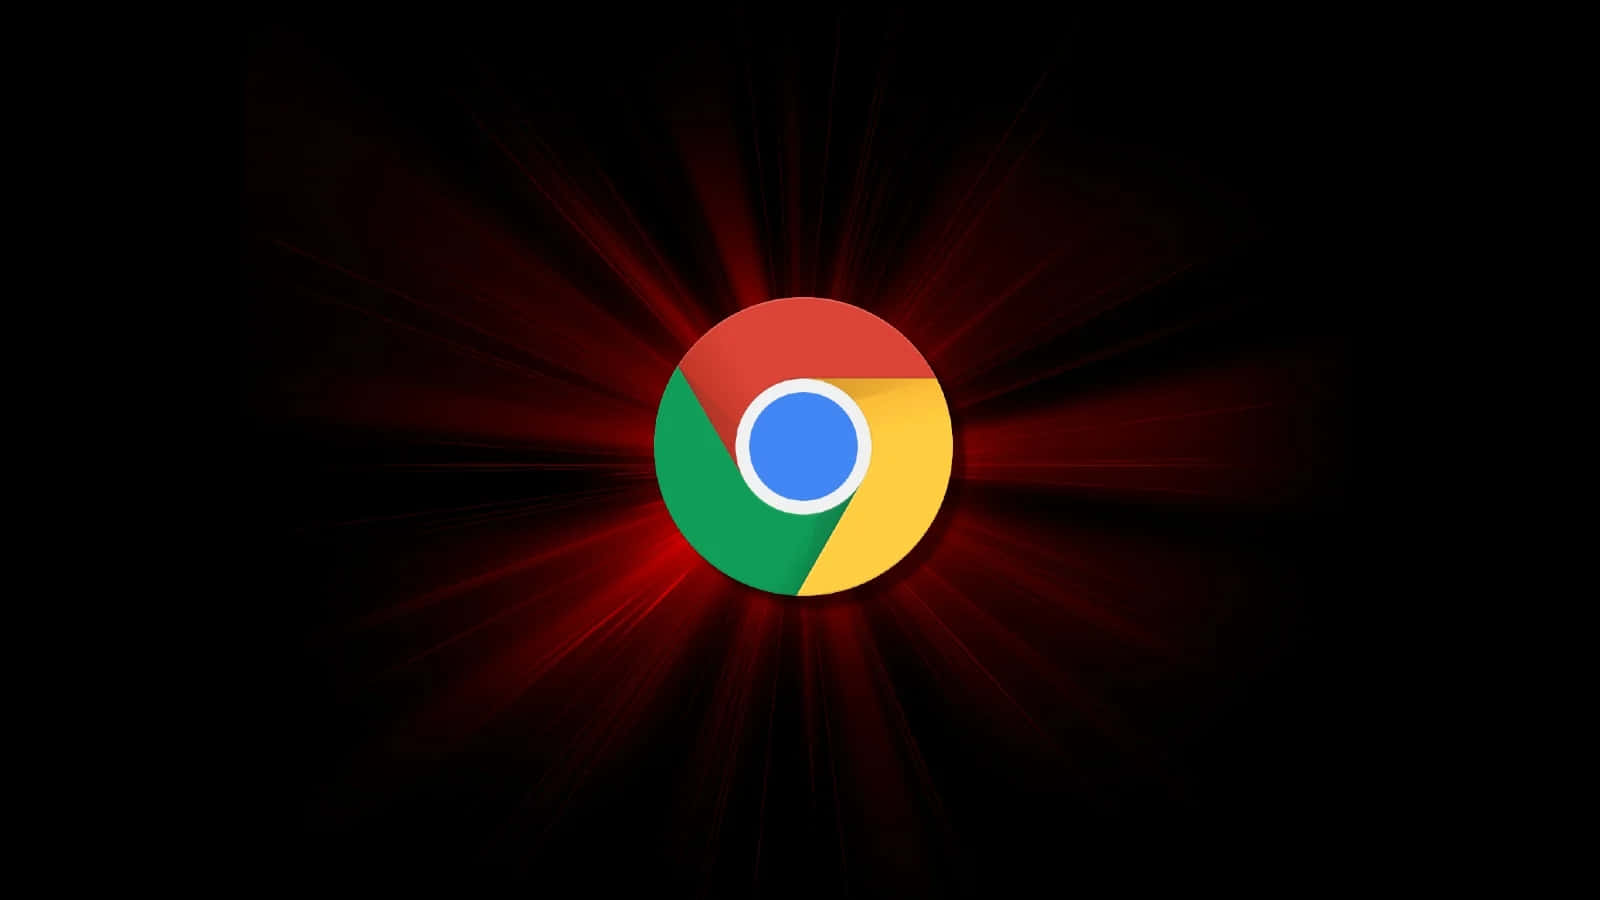 Add to the speed and convenience of your online world with Google Chrome.